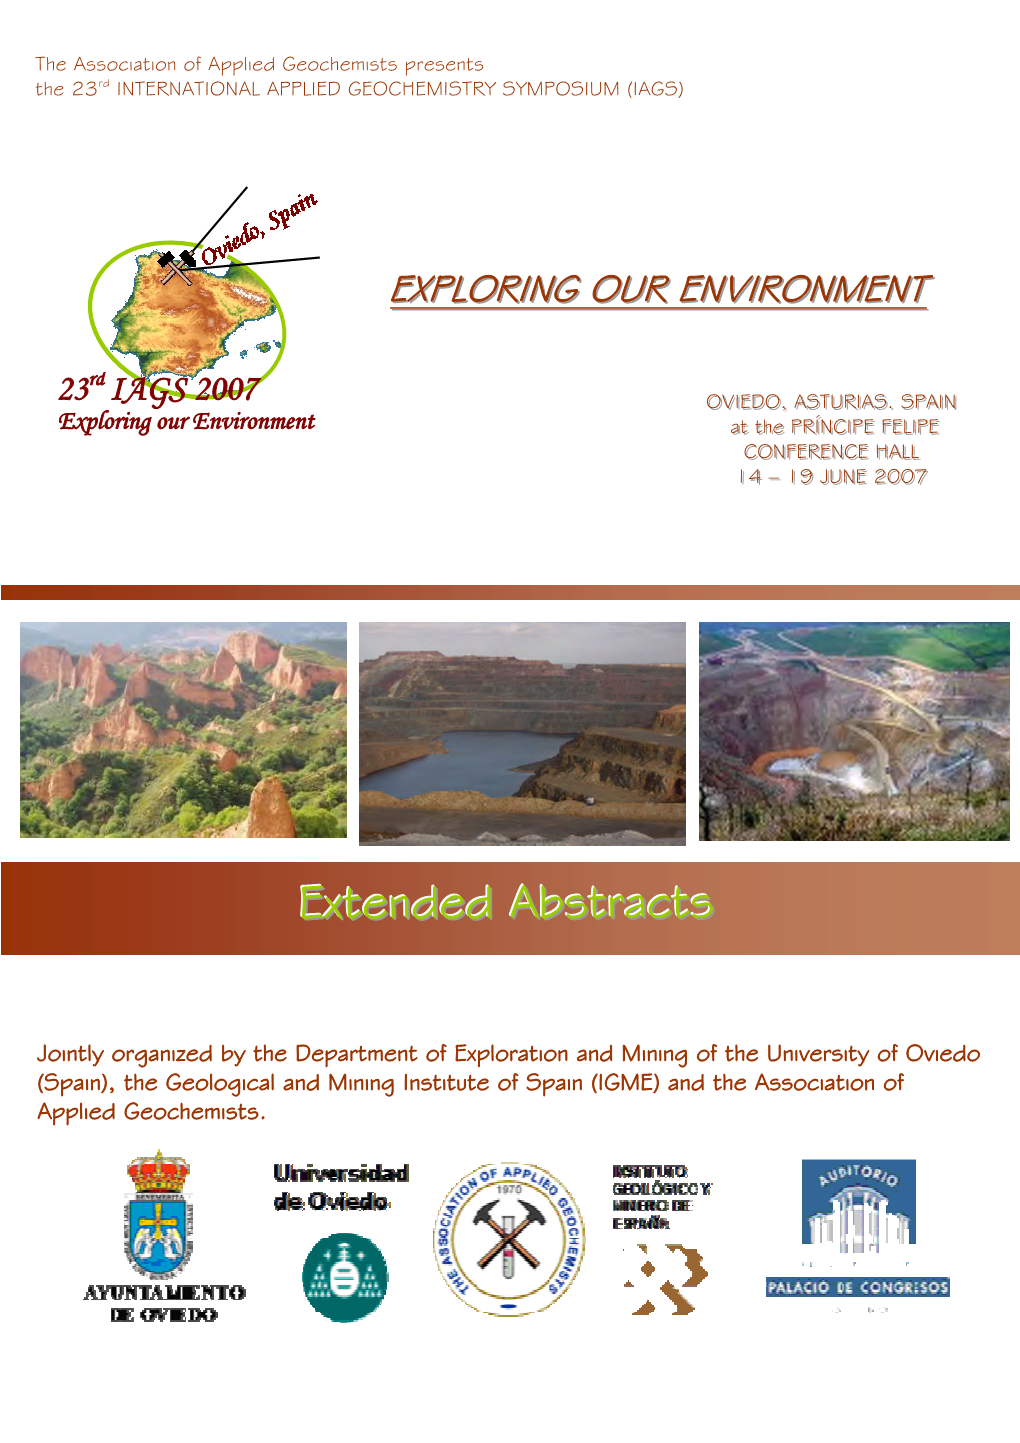 Extended Abstracts of the Symposium